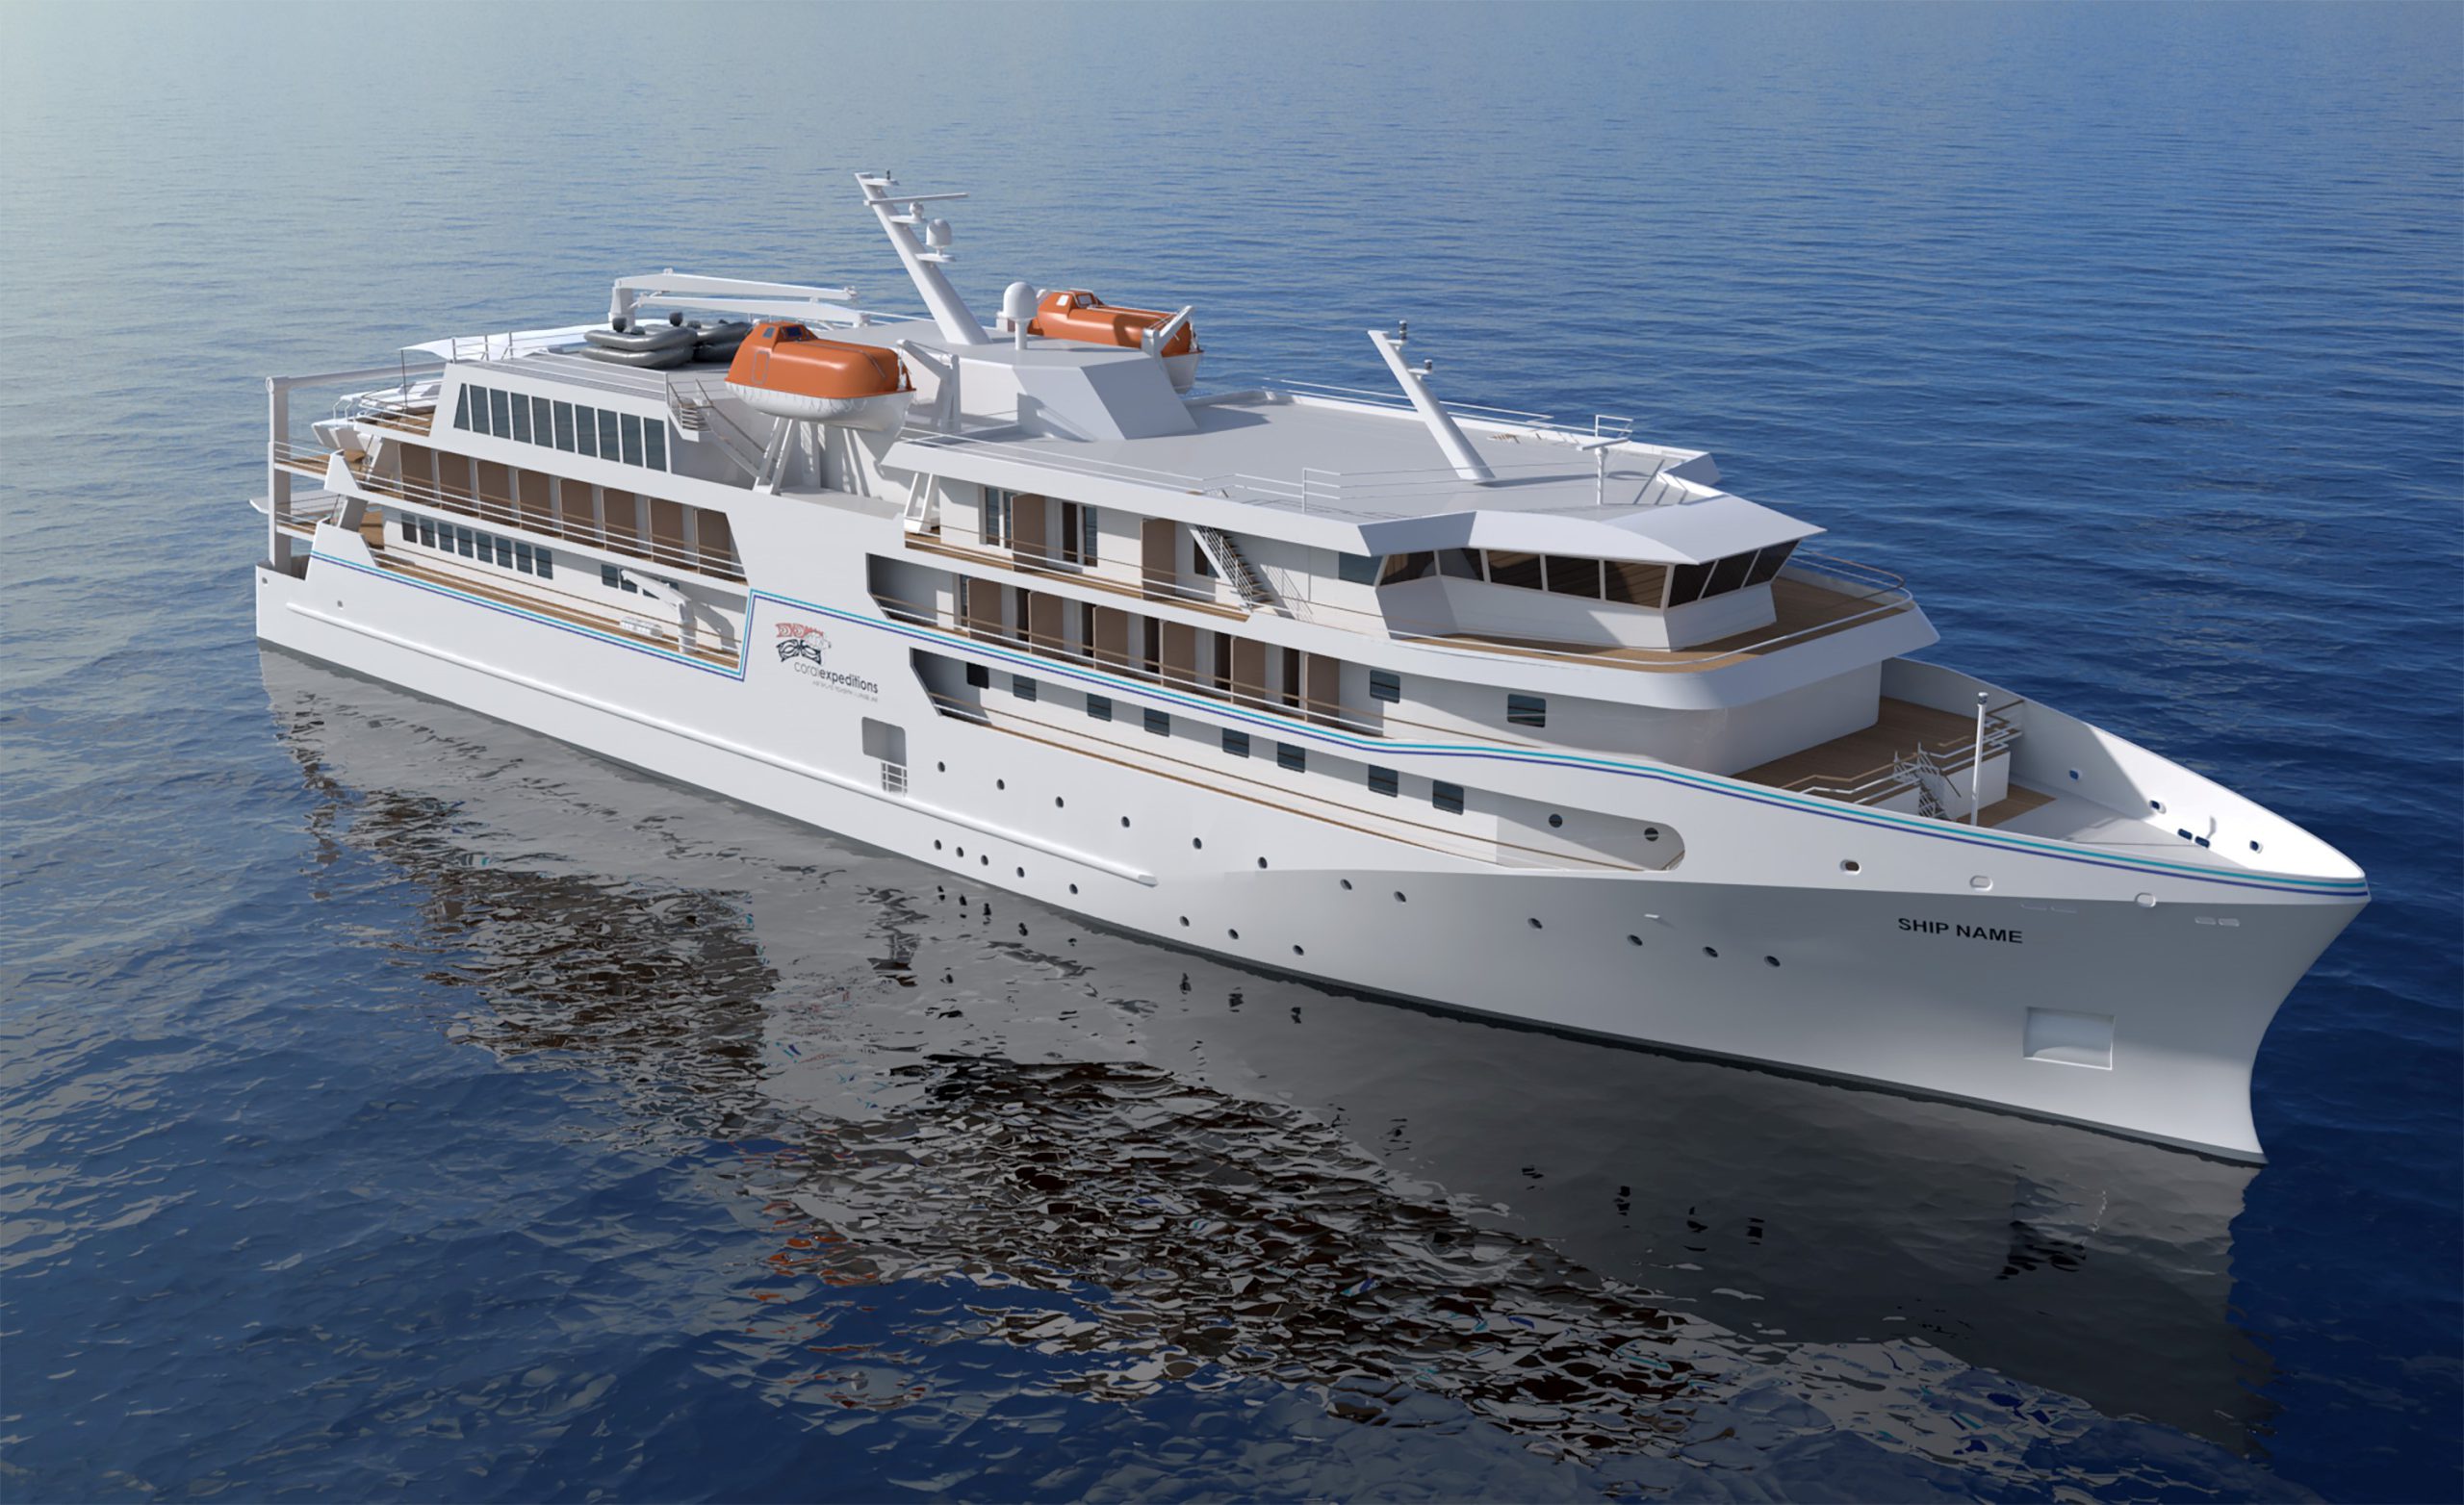 Coral Expeditions opens bookings for 'world's most advanced tropical expedition ship'